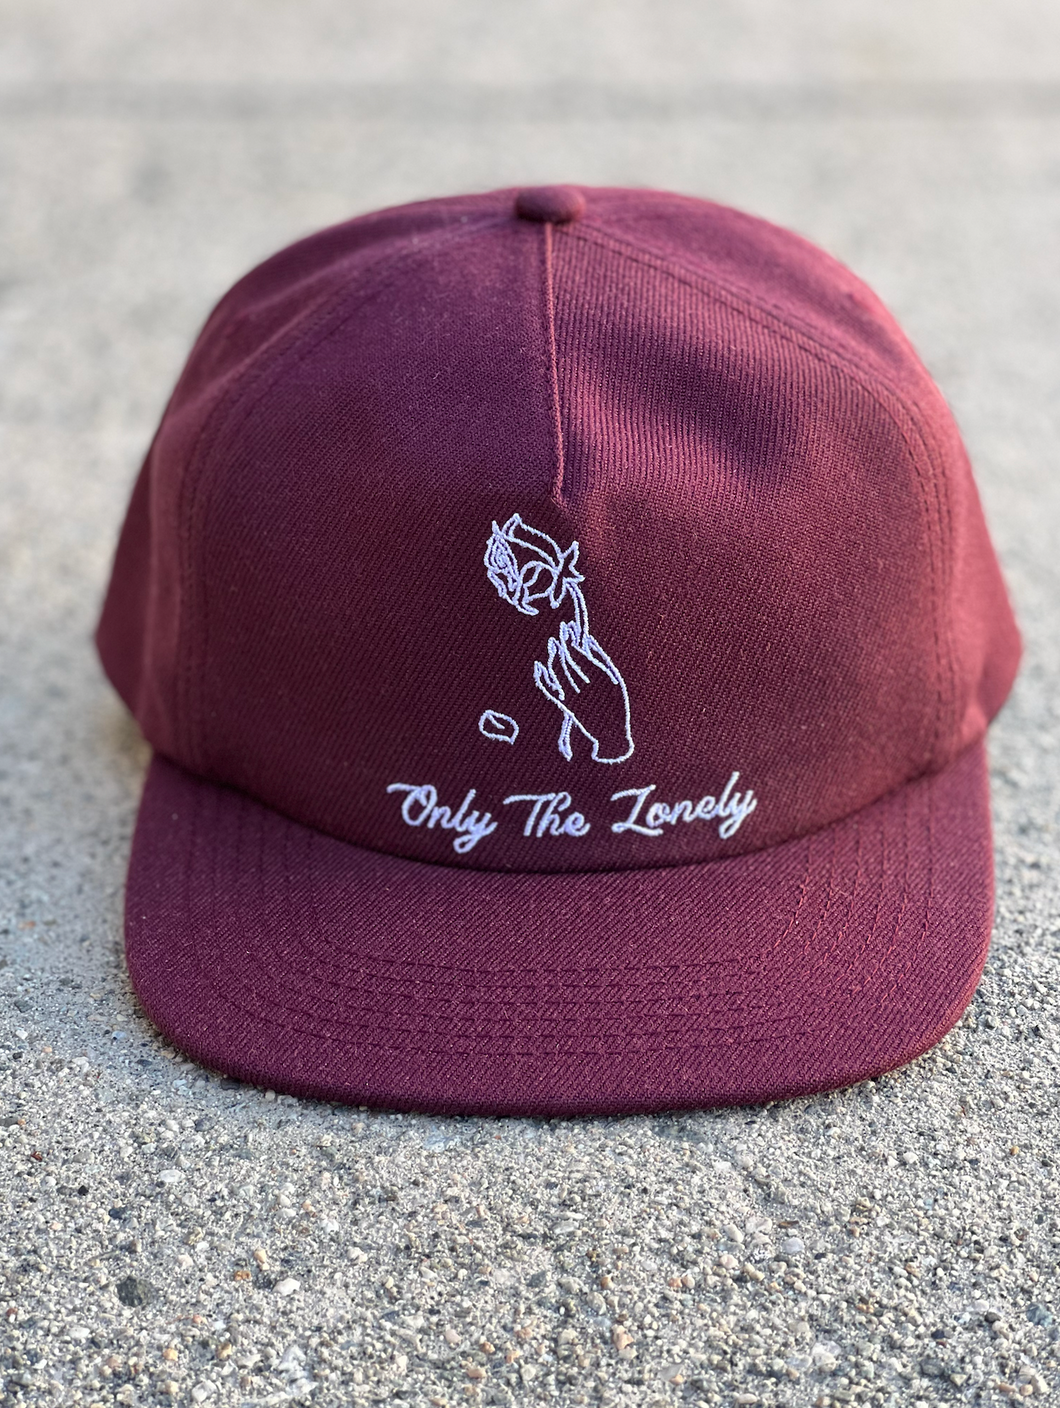 Only The Lonely - Maroon Wool Hat